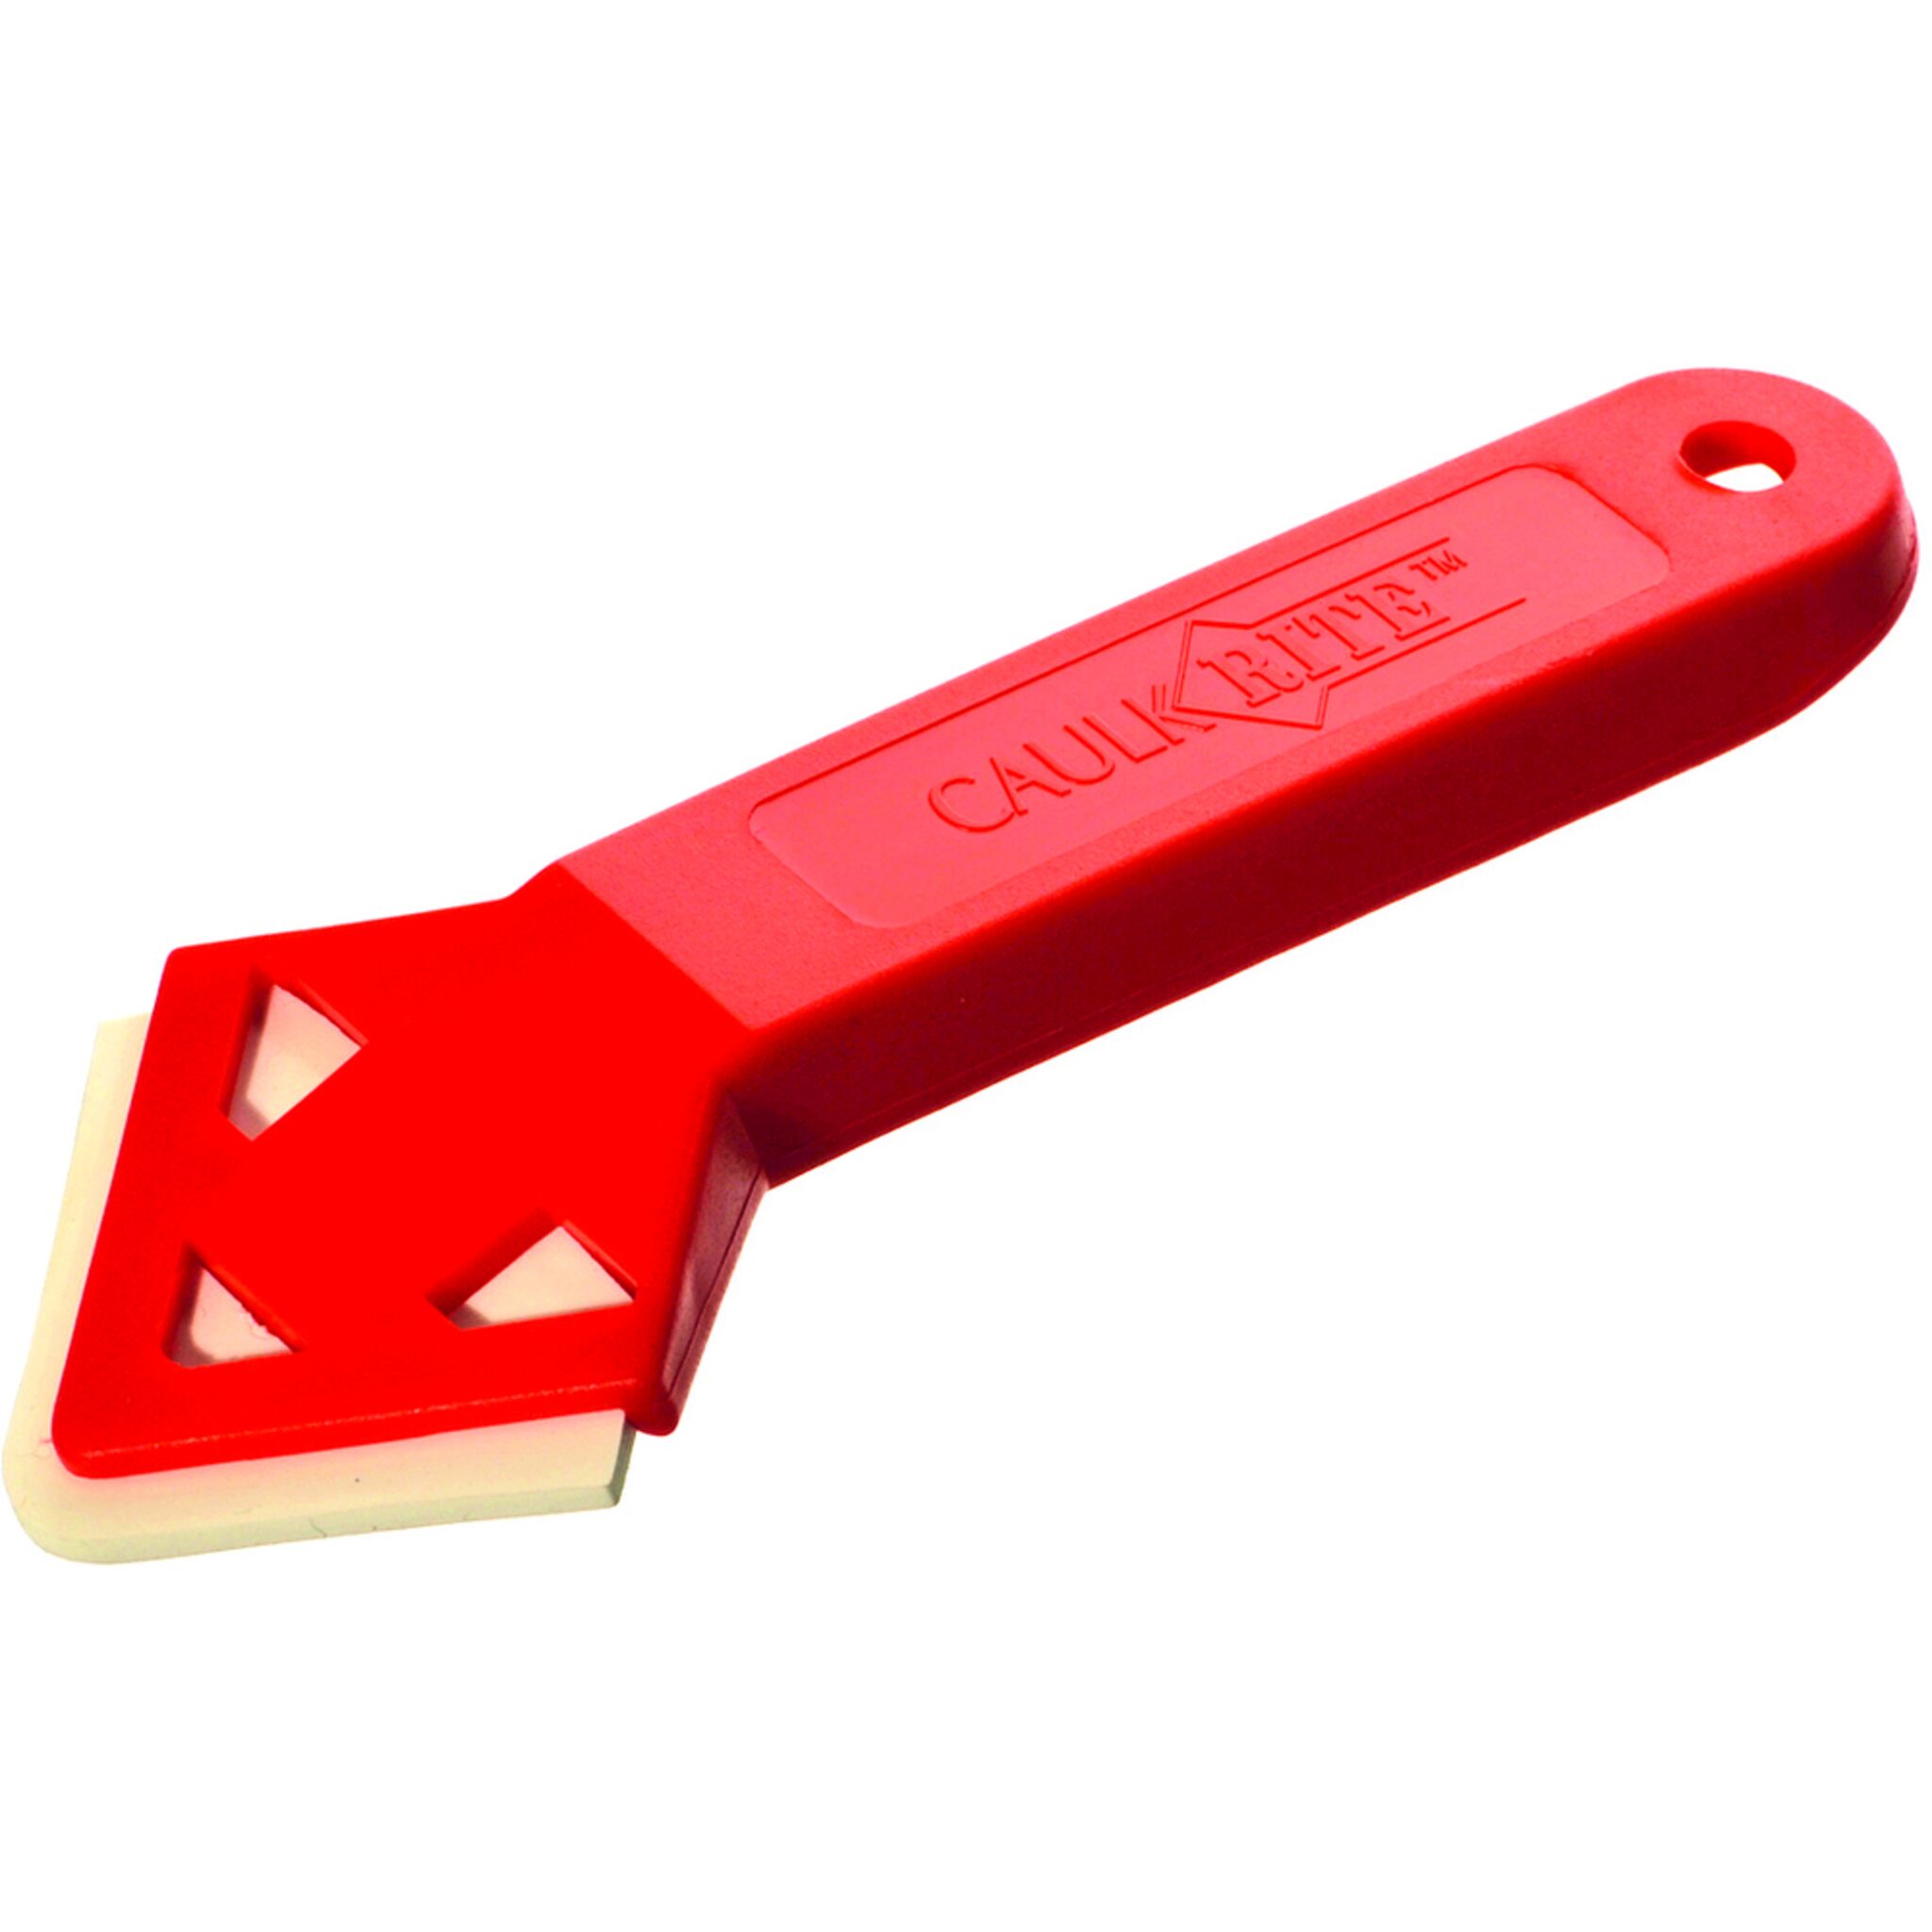 Yachticon joint trowel